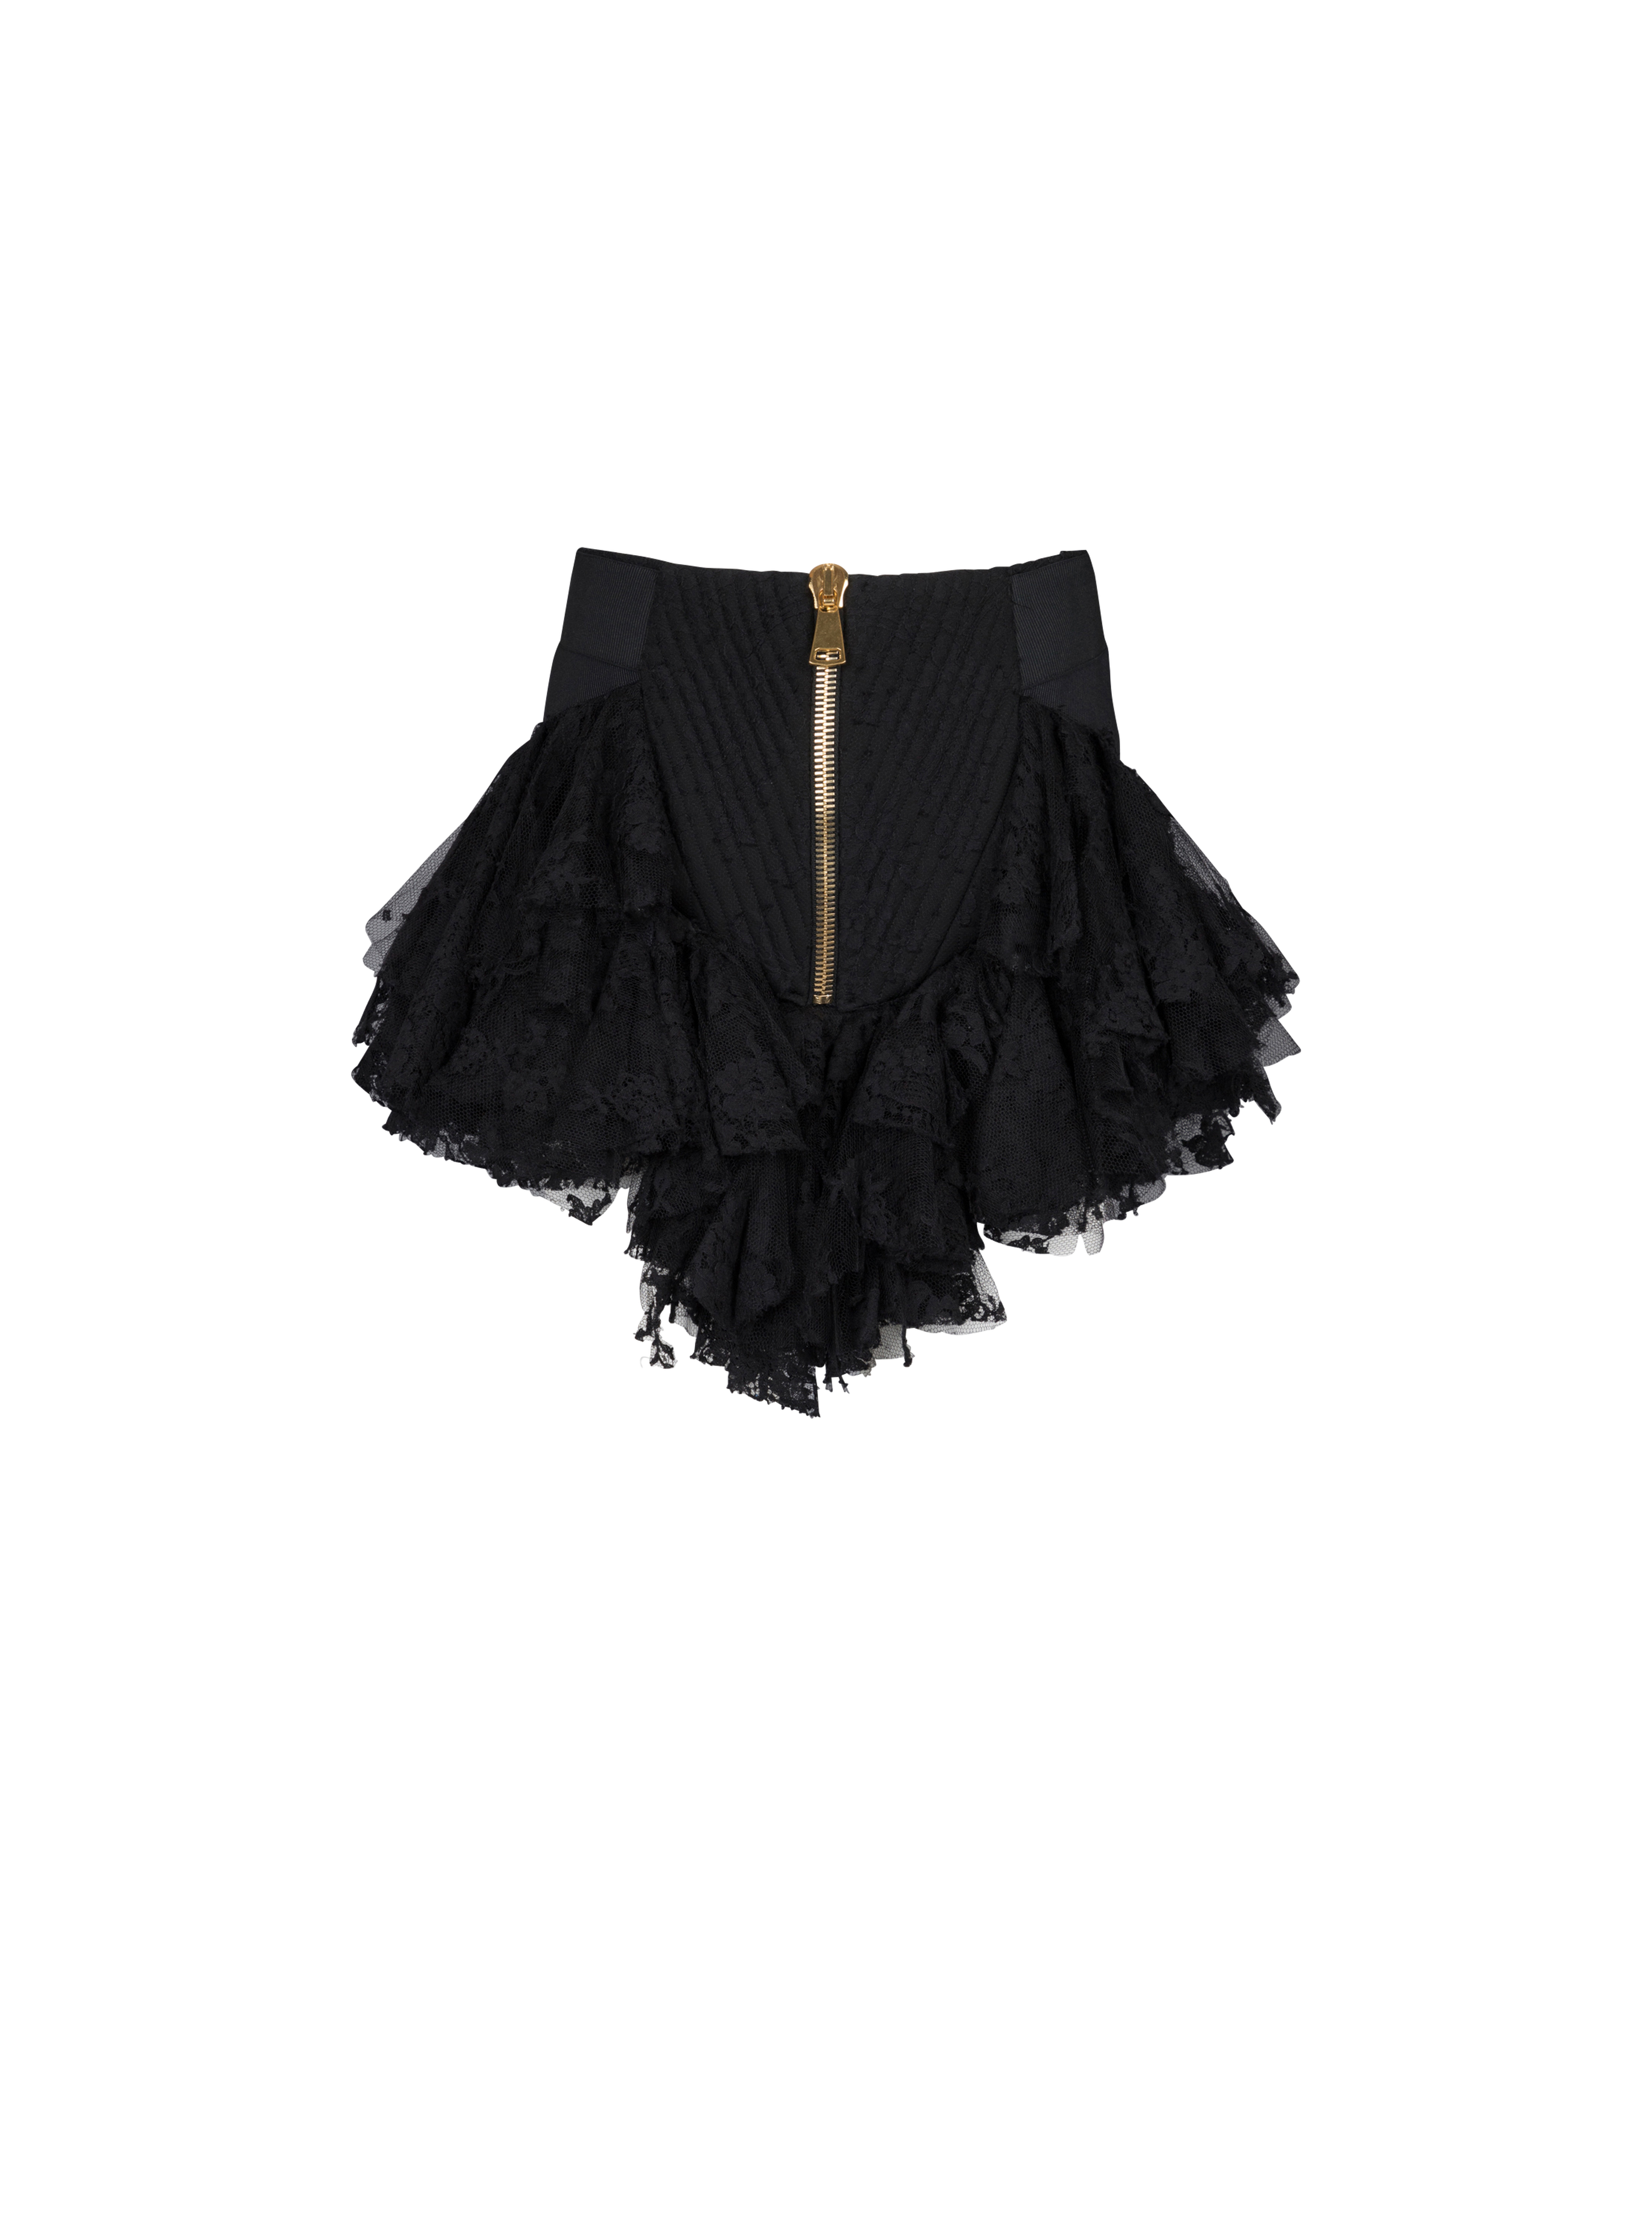 Short lace skirt with ruffles, black